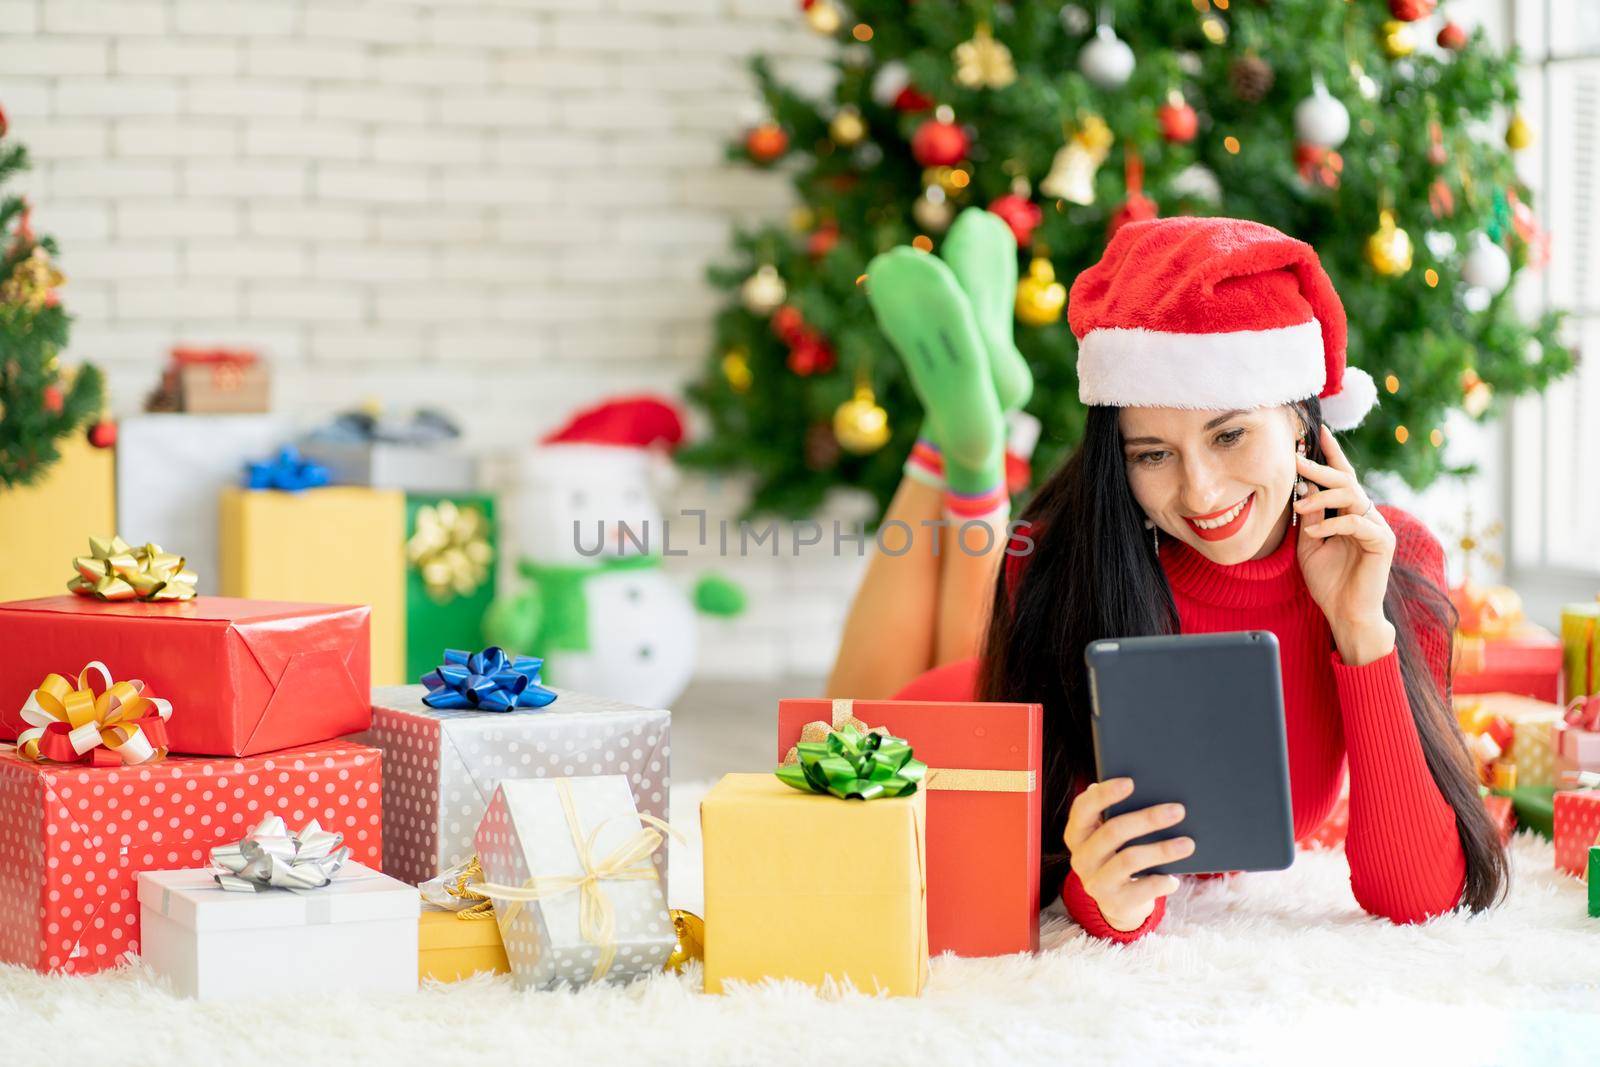 Pretty woman with Christmas costume hold tablet and smile with happiness during Christmas festival. by nrradmin